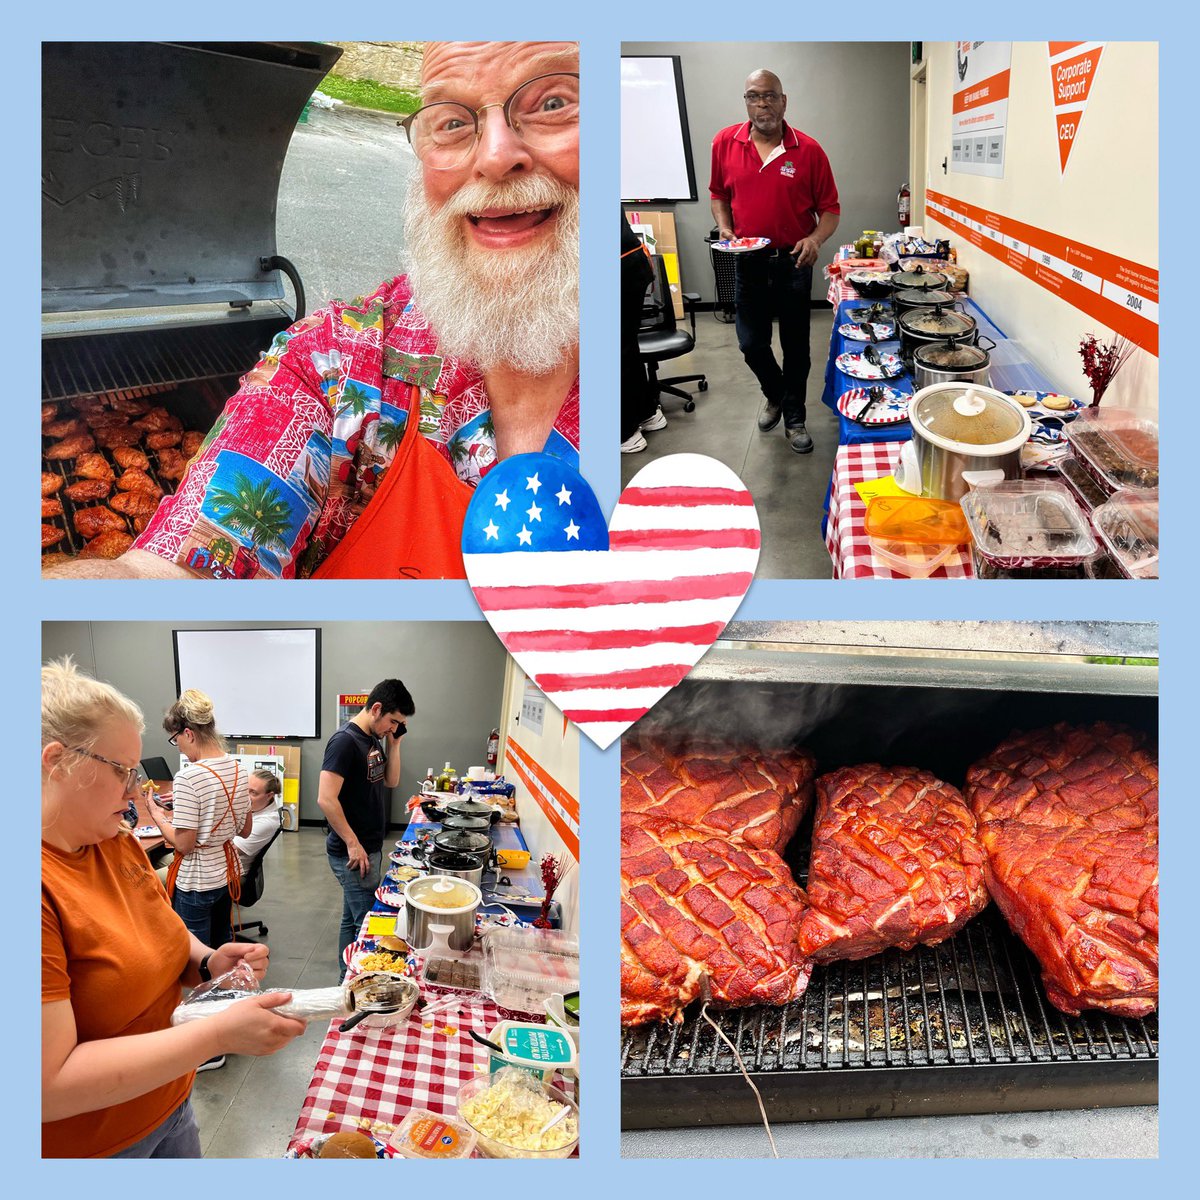 #HD733 pulled out all the stops for #MemorialDay2022 BBQ galore!  Pork, chicken, beef and Santa Scott got caught cooking wings on the Traeger for the overnight crew! #Rememberingthefallen #takingcareofourpeople @mjlojewski @AndreaMcTHD @njr2408 @v_shaye @THD_Audrey